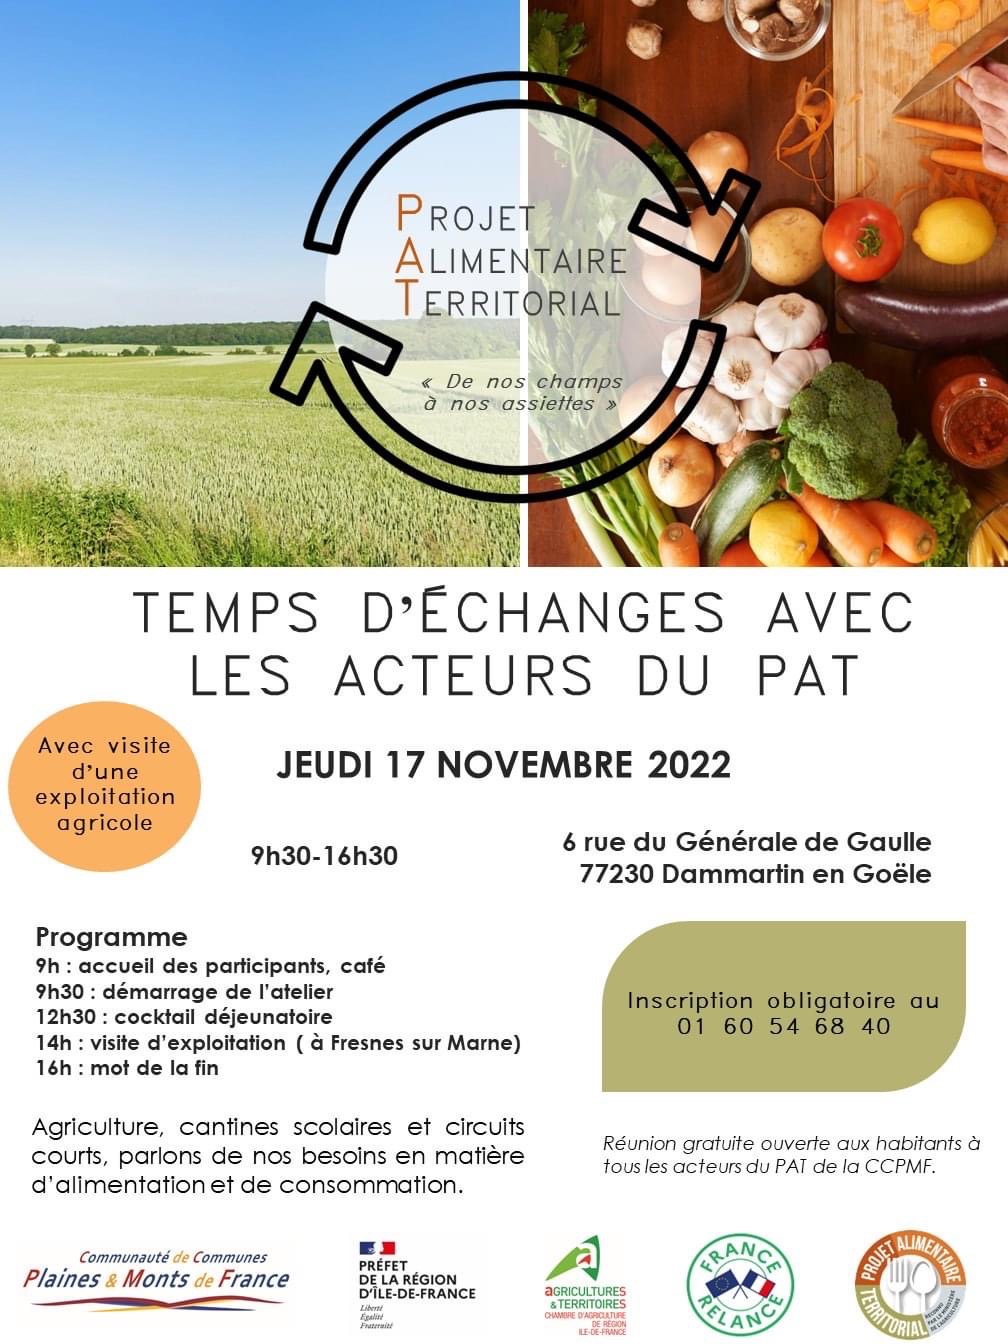 CCPMF - PROJET ALIMENTAIRE TERRITORIAL